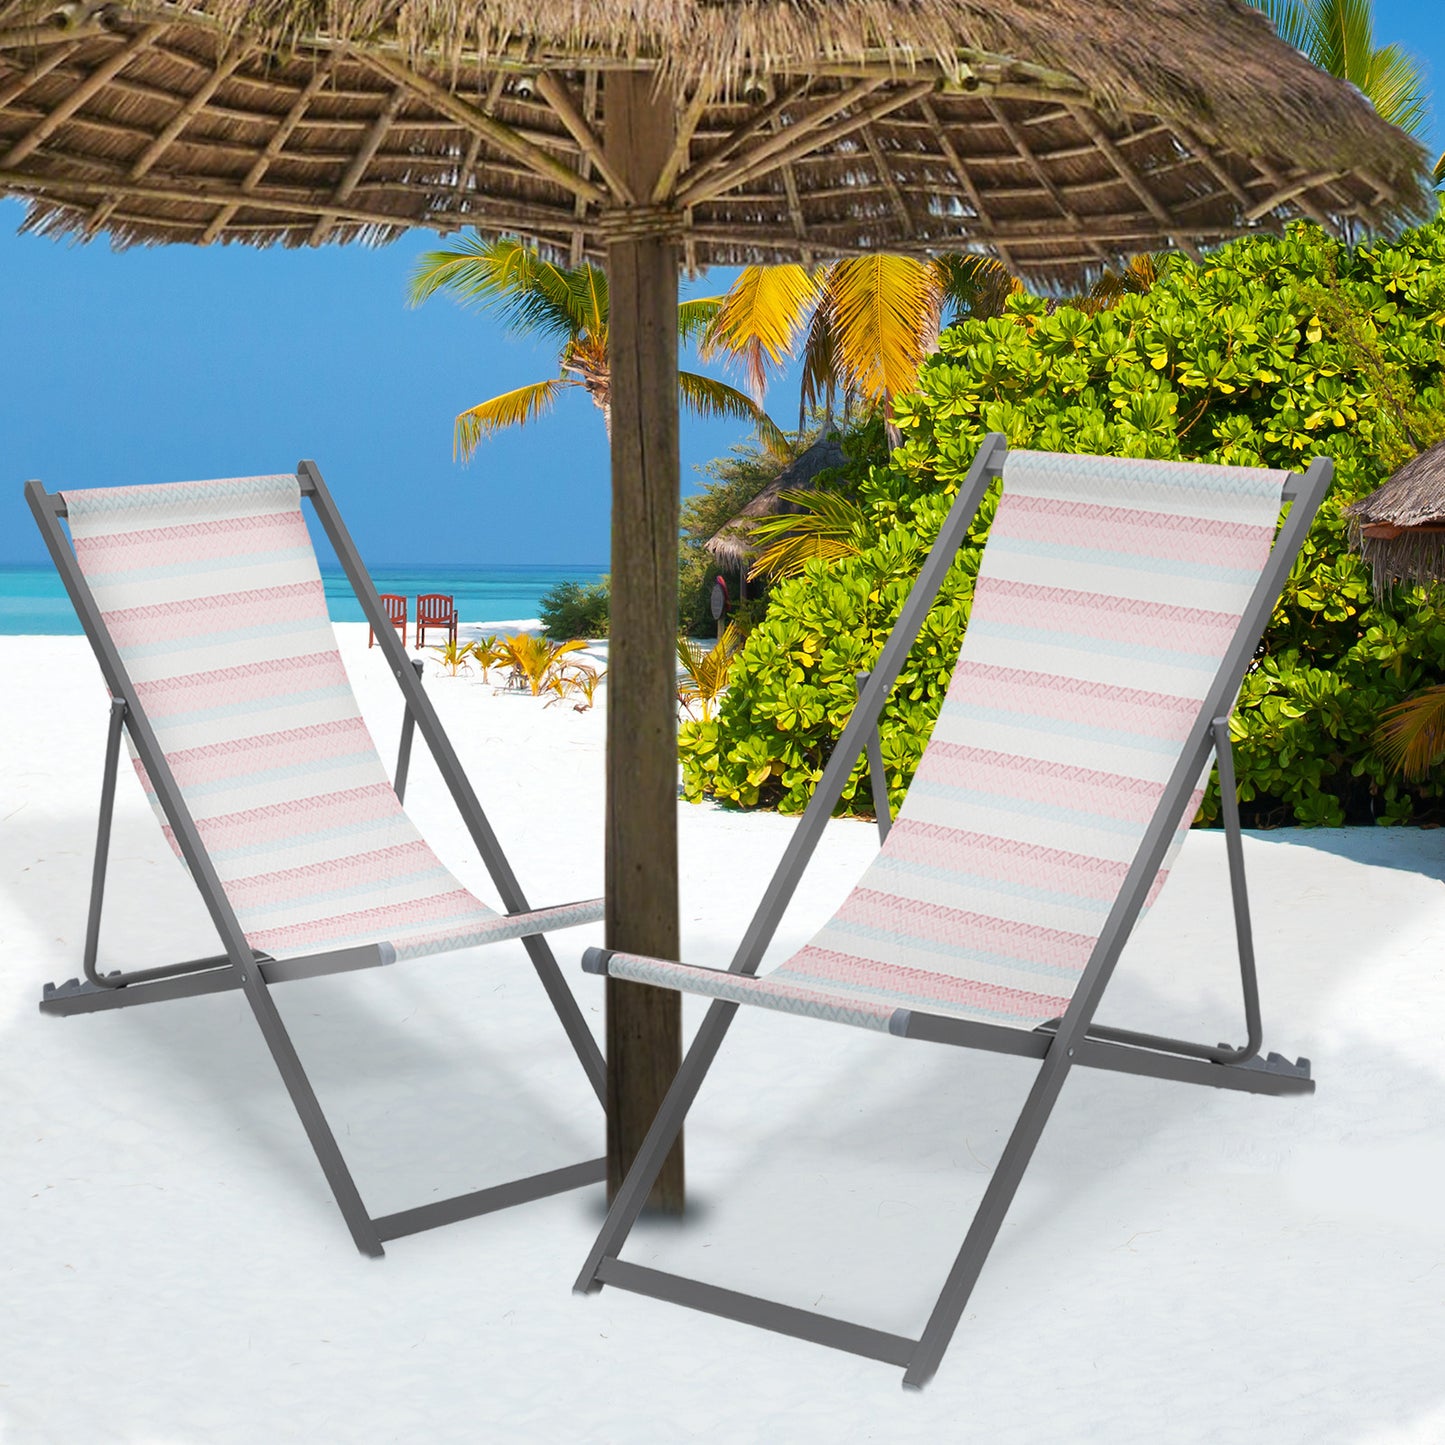 Reclinable Foldable Beach Sling Chair - Teslin Fabric Seat